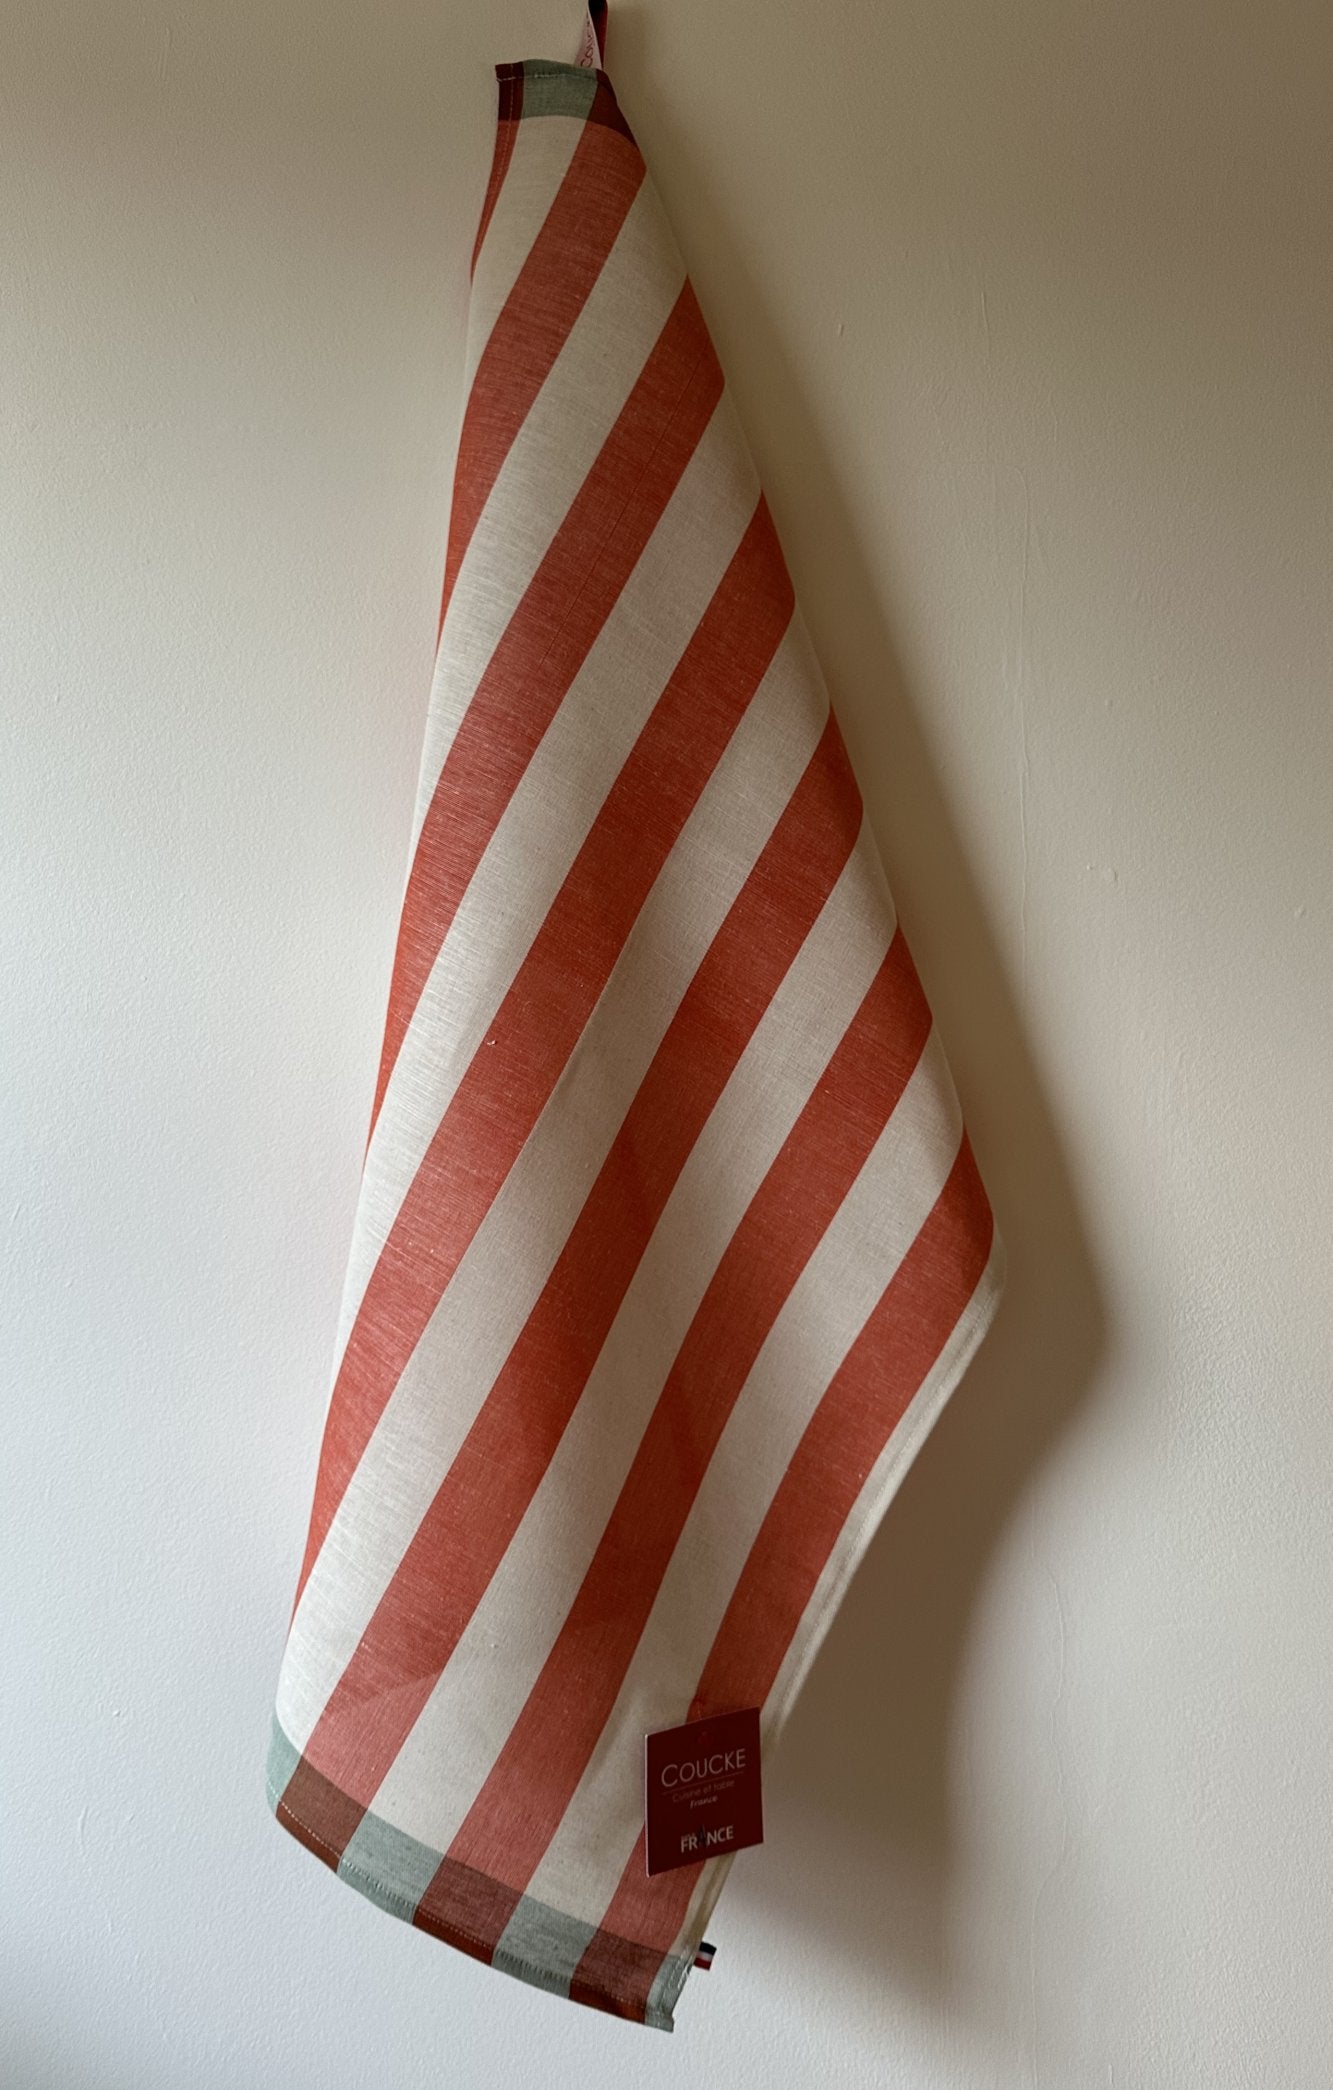 Coucke "Malo Stripe" (Red), Woven linen & cotton tea towel. Made in France.